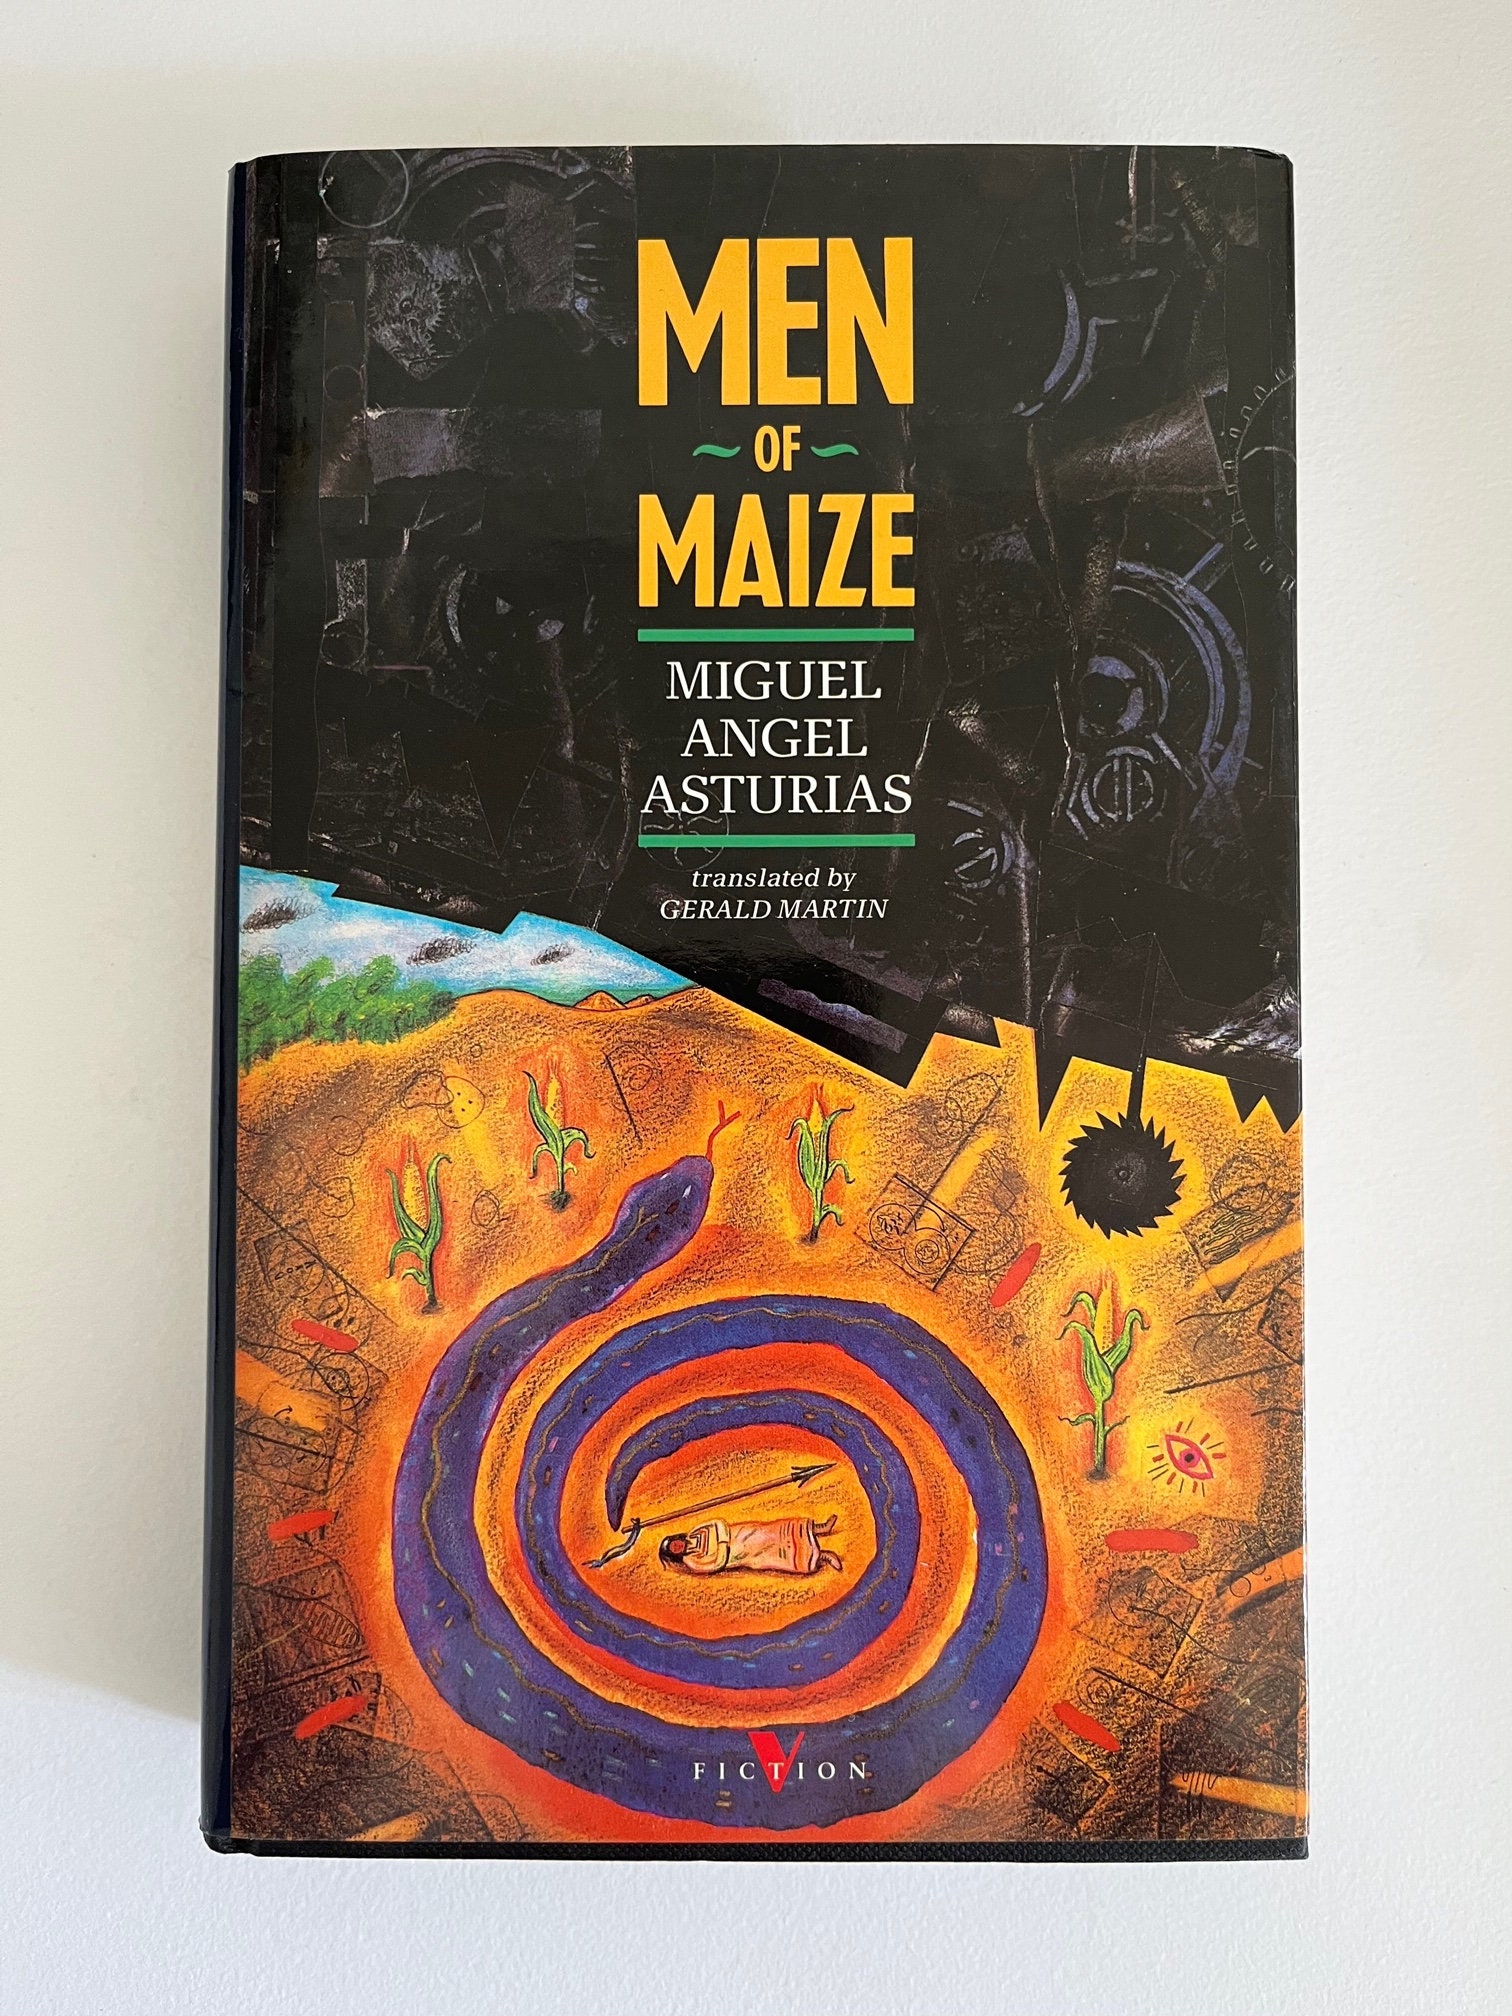 MEN of MAIZE Miguel Angel ASTURIAS Hardcover 1988 / photo pic